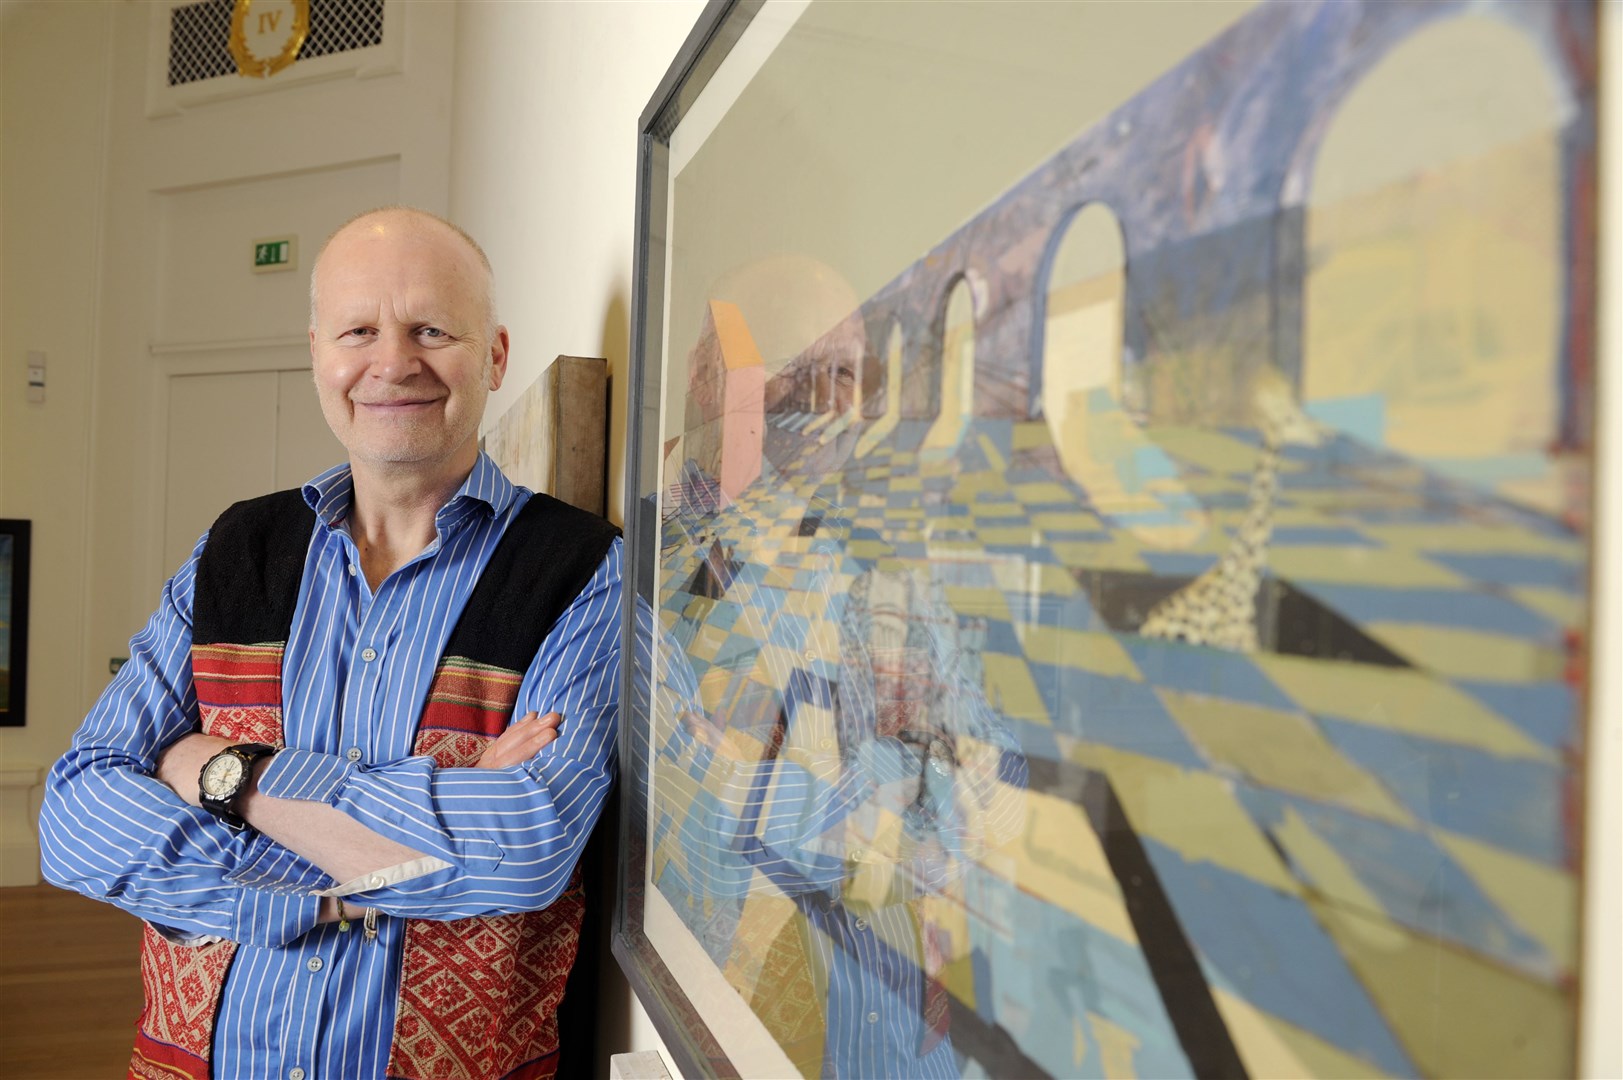 Forres artist and John Busby Award winner Kenneth Le Riche with his work, "Space as Artifice with Durer’s Rhino". Picture: Colin Hattersley.